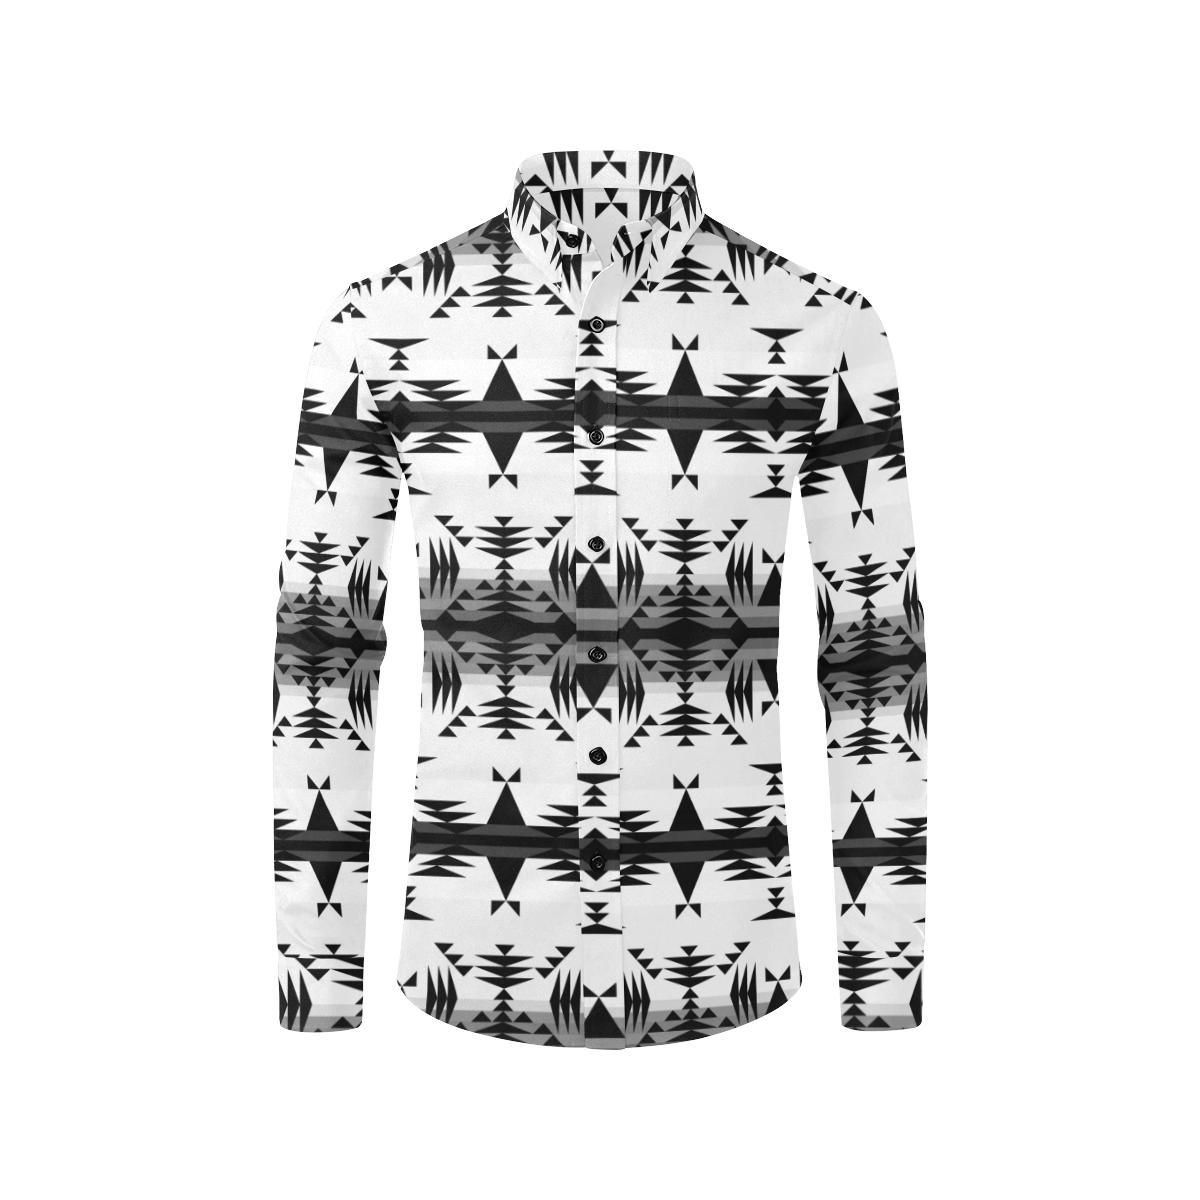 Between the Mountains White and Black Casual Dress Shirt